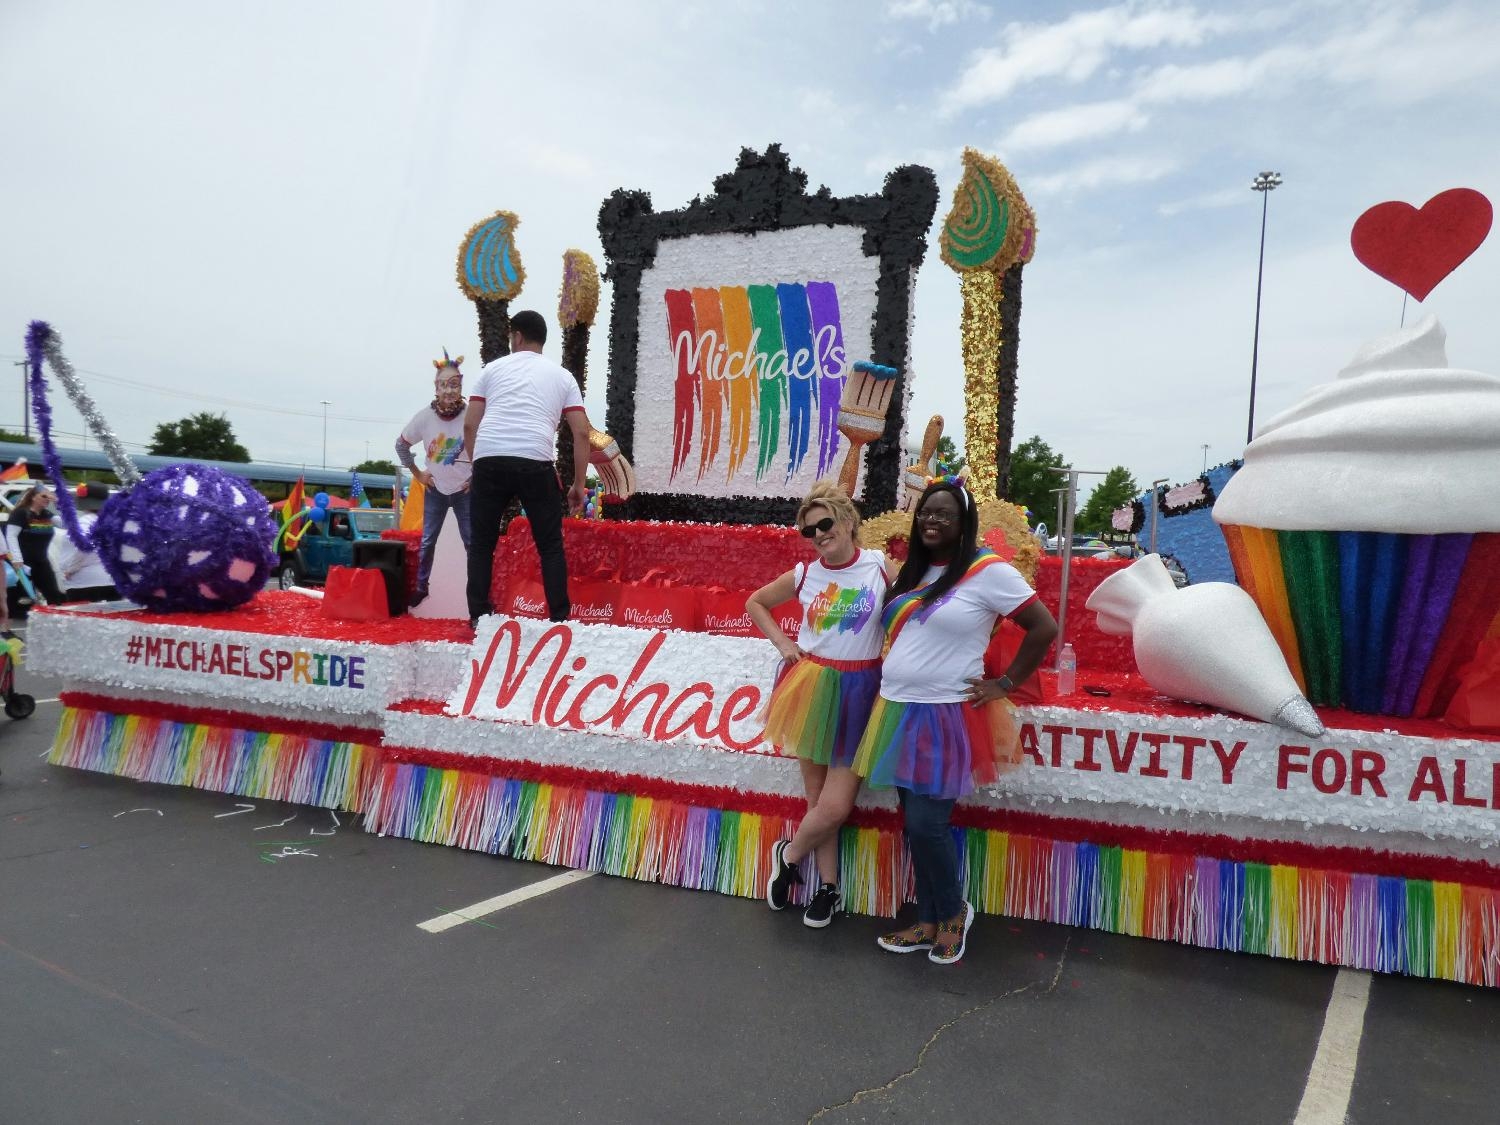 We take Pride in our team - and in our pledge to be Open to All. Here our Team participates in the Dallas Pride Parade.